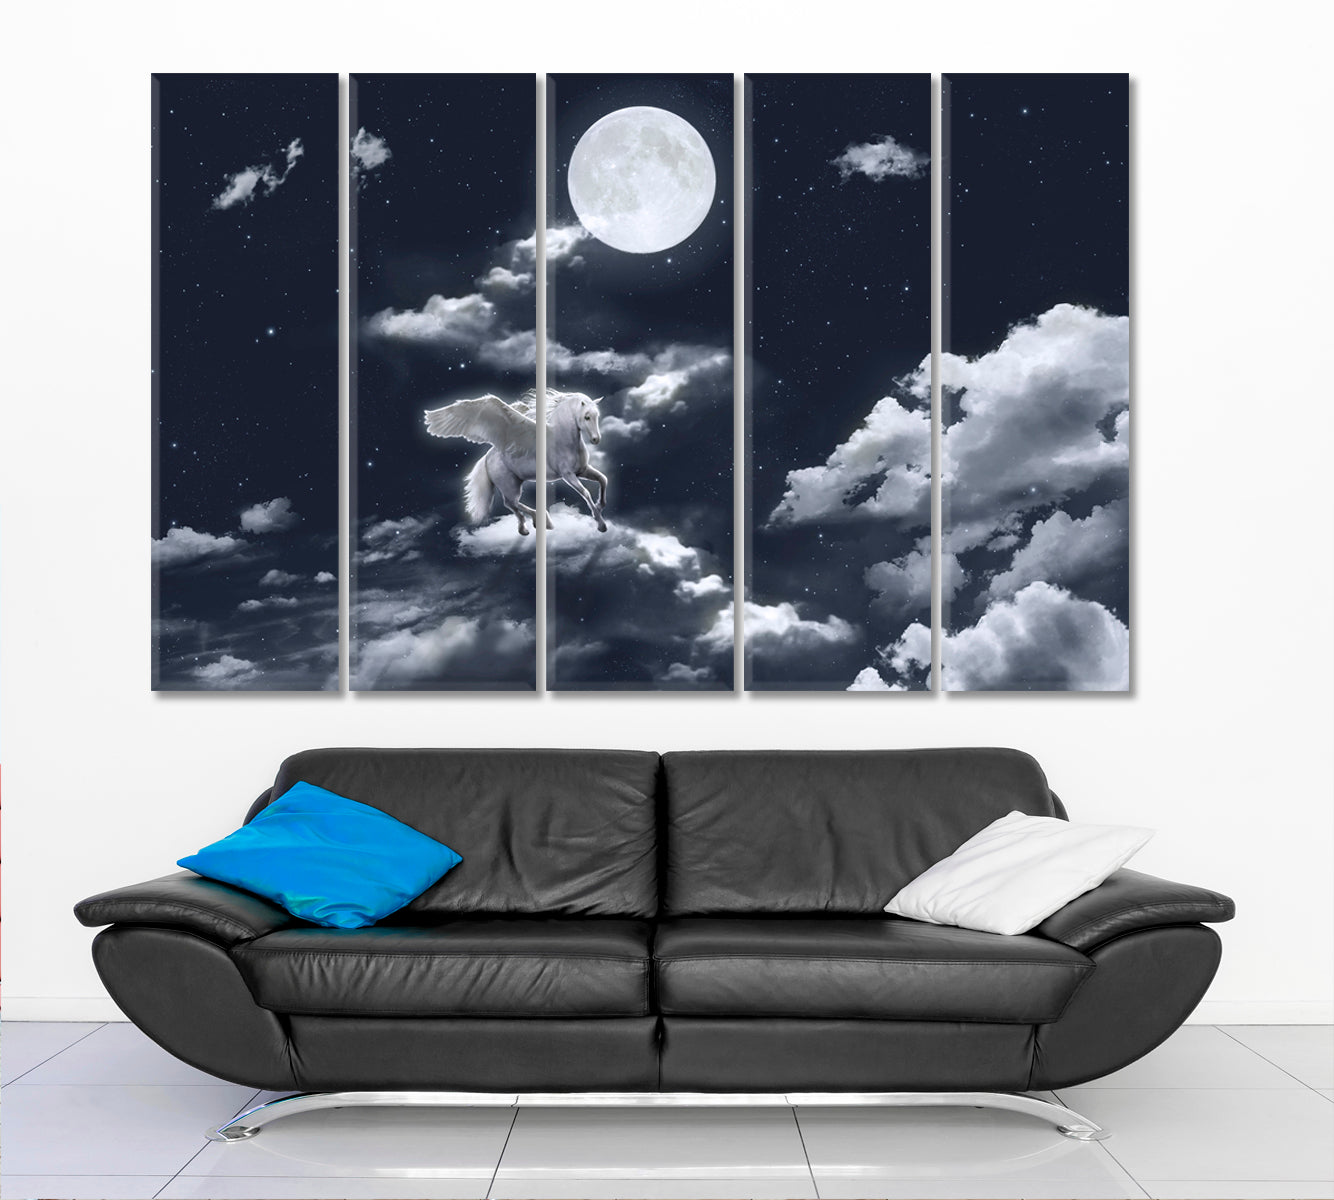 SKYSCAPE White Winged Horse Full Moon Skyscape Canvas Artesty 5 panels 36" x 24" 